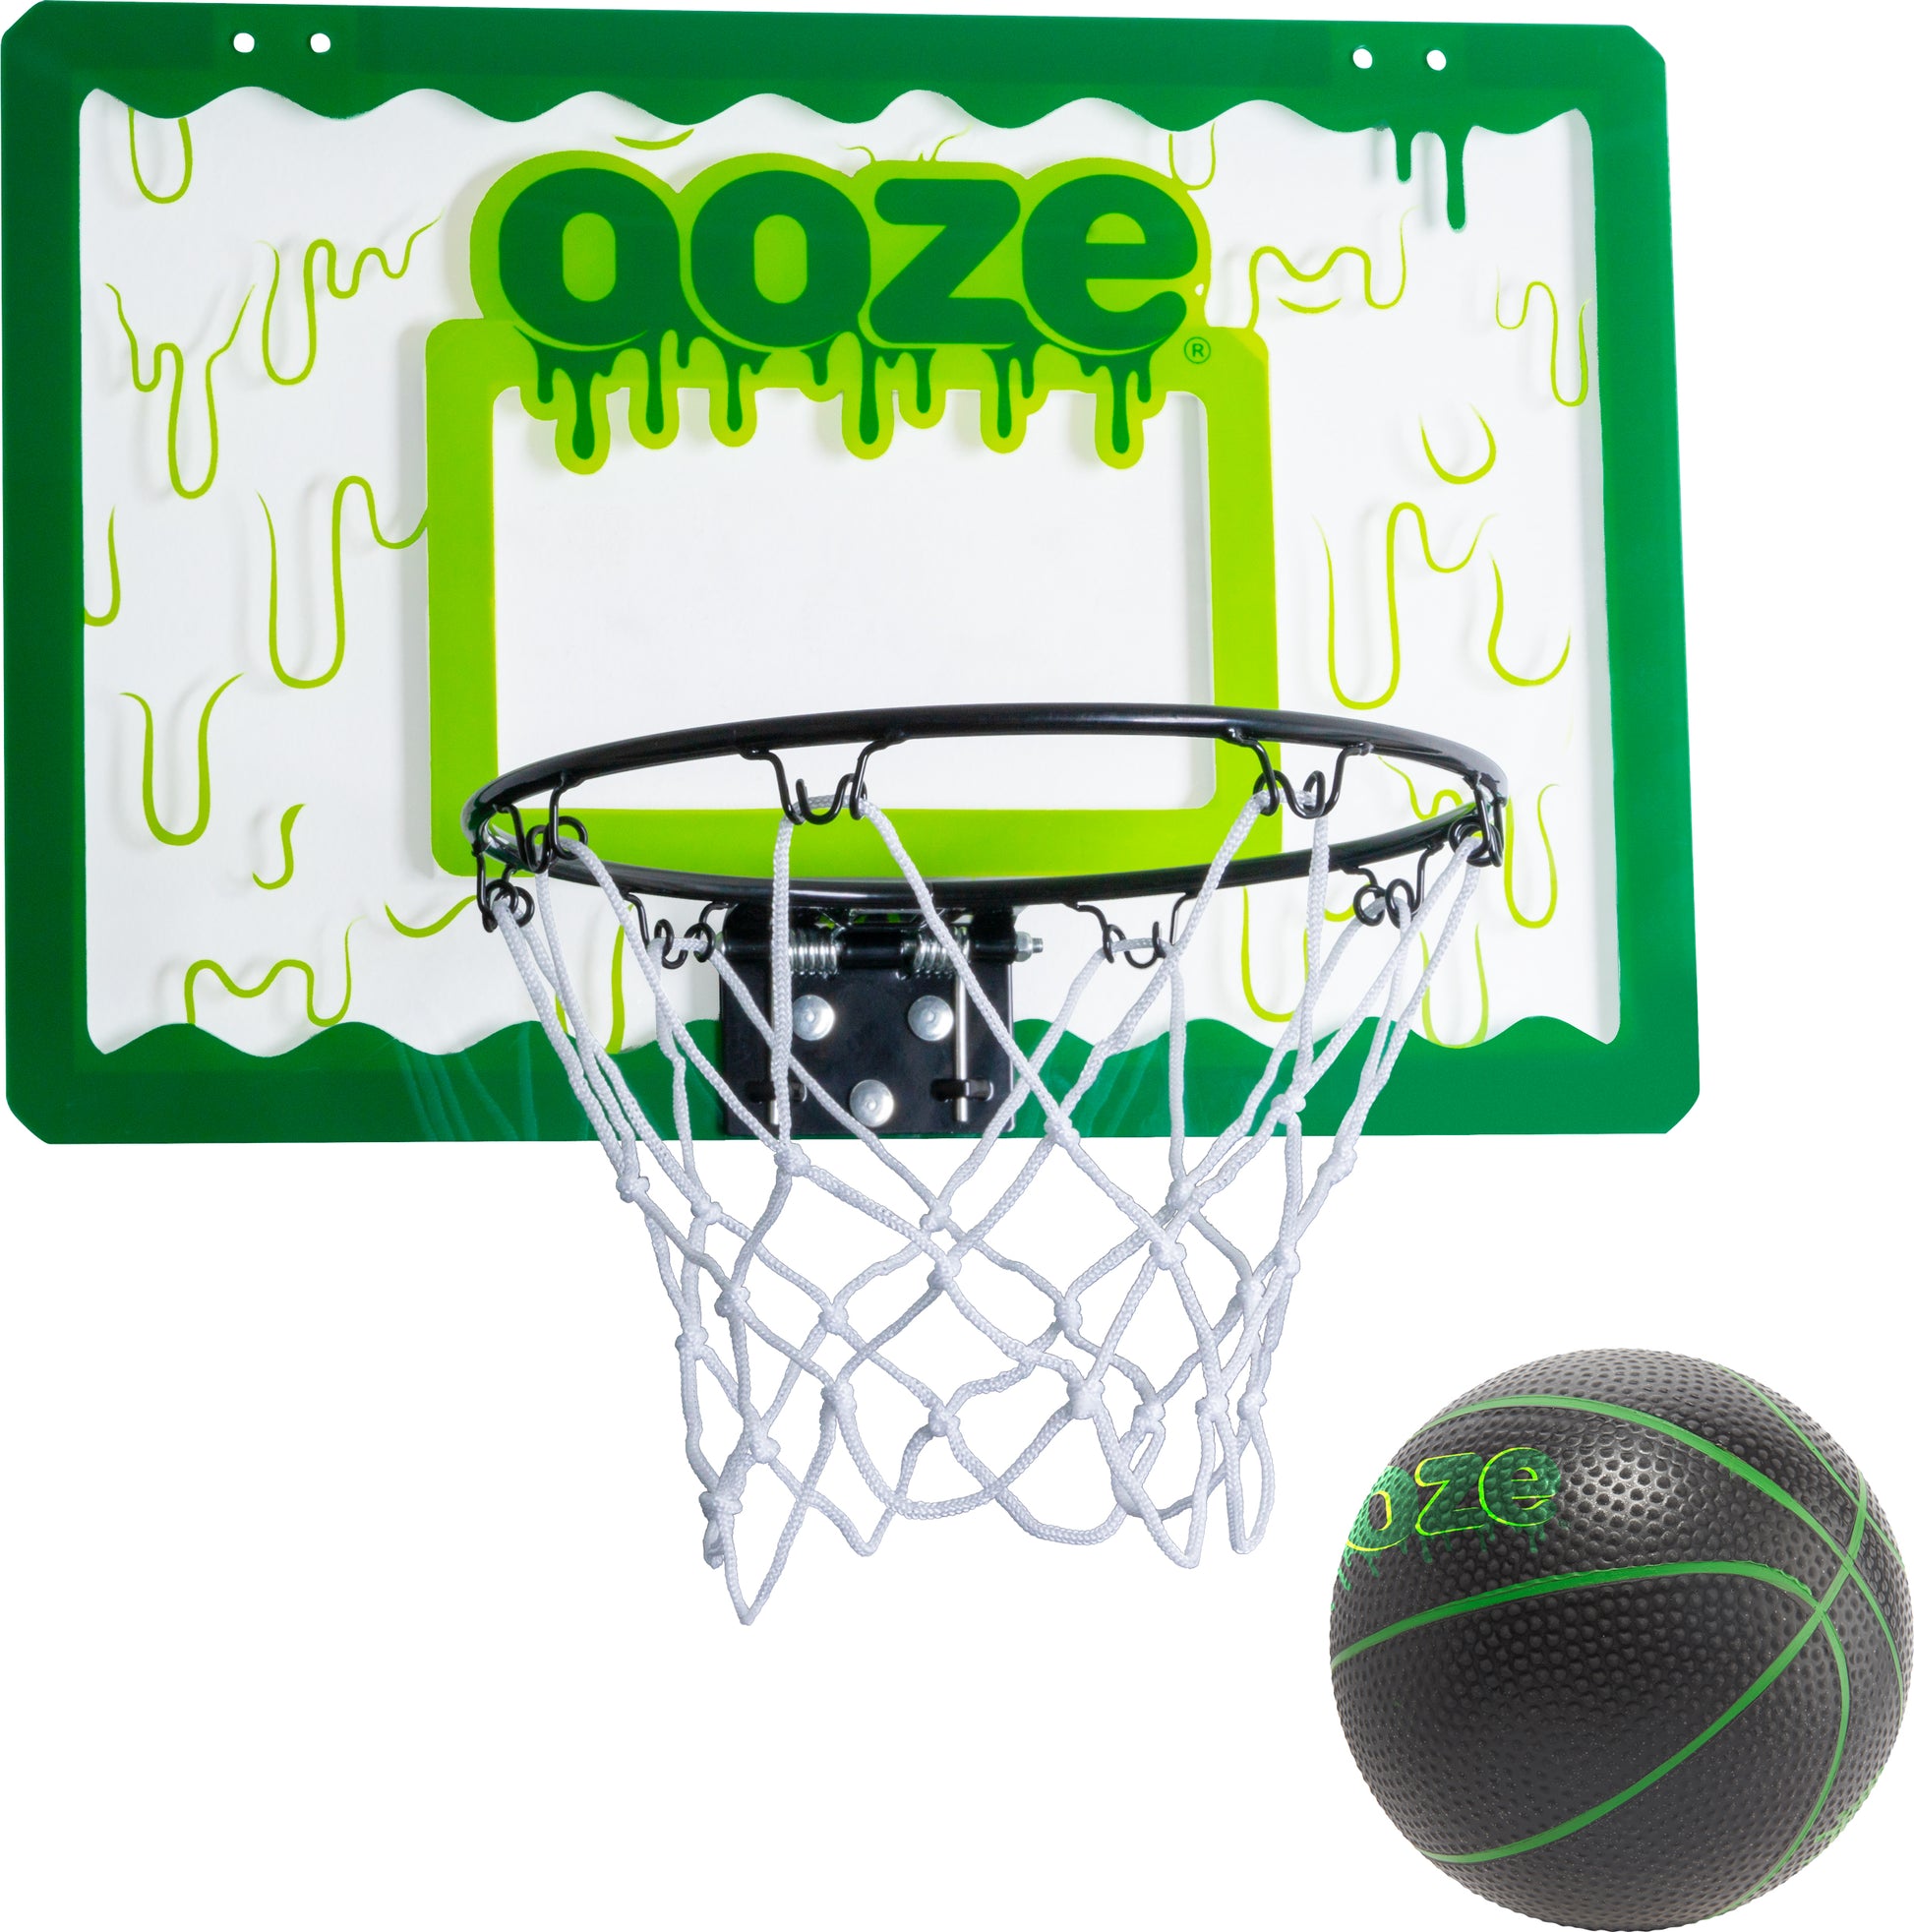 The Ooze Mini Basketball Hoop has a clear backboard with green accents and an Ooze logo. The mini black and green basketball is to the lower right